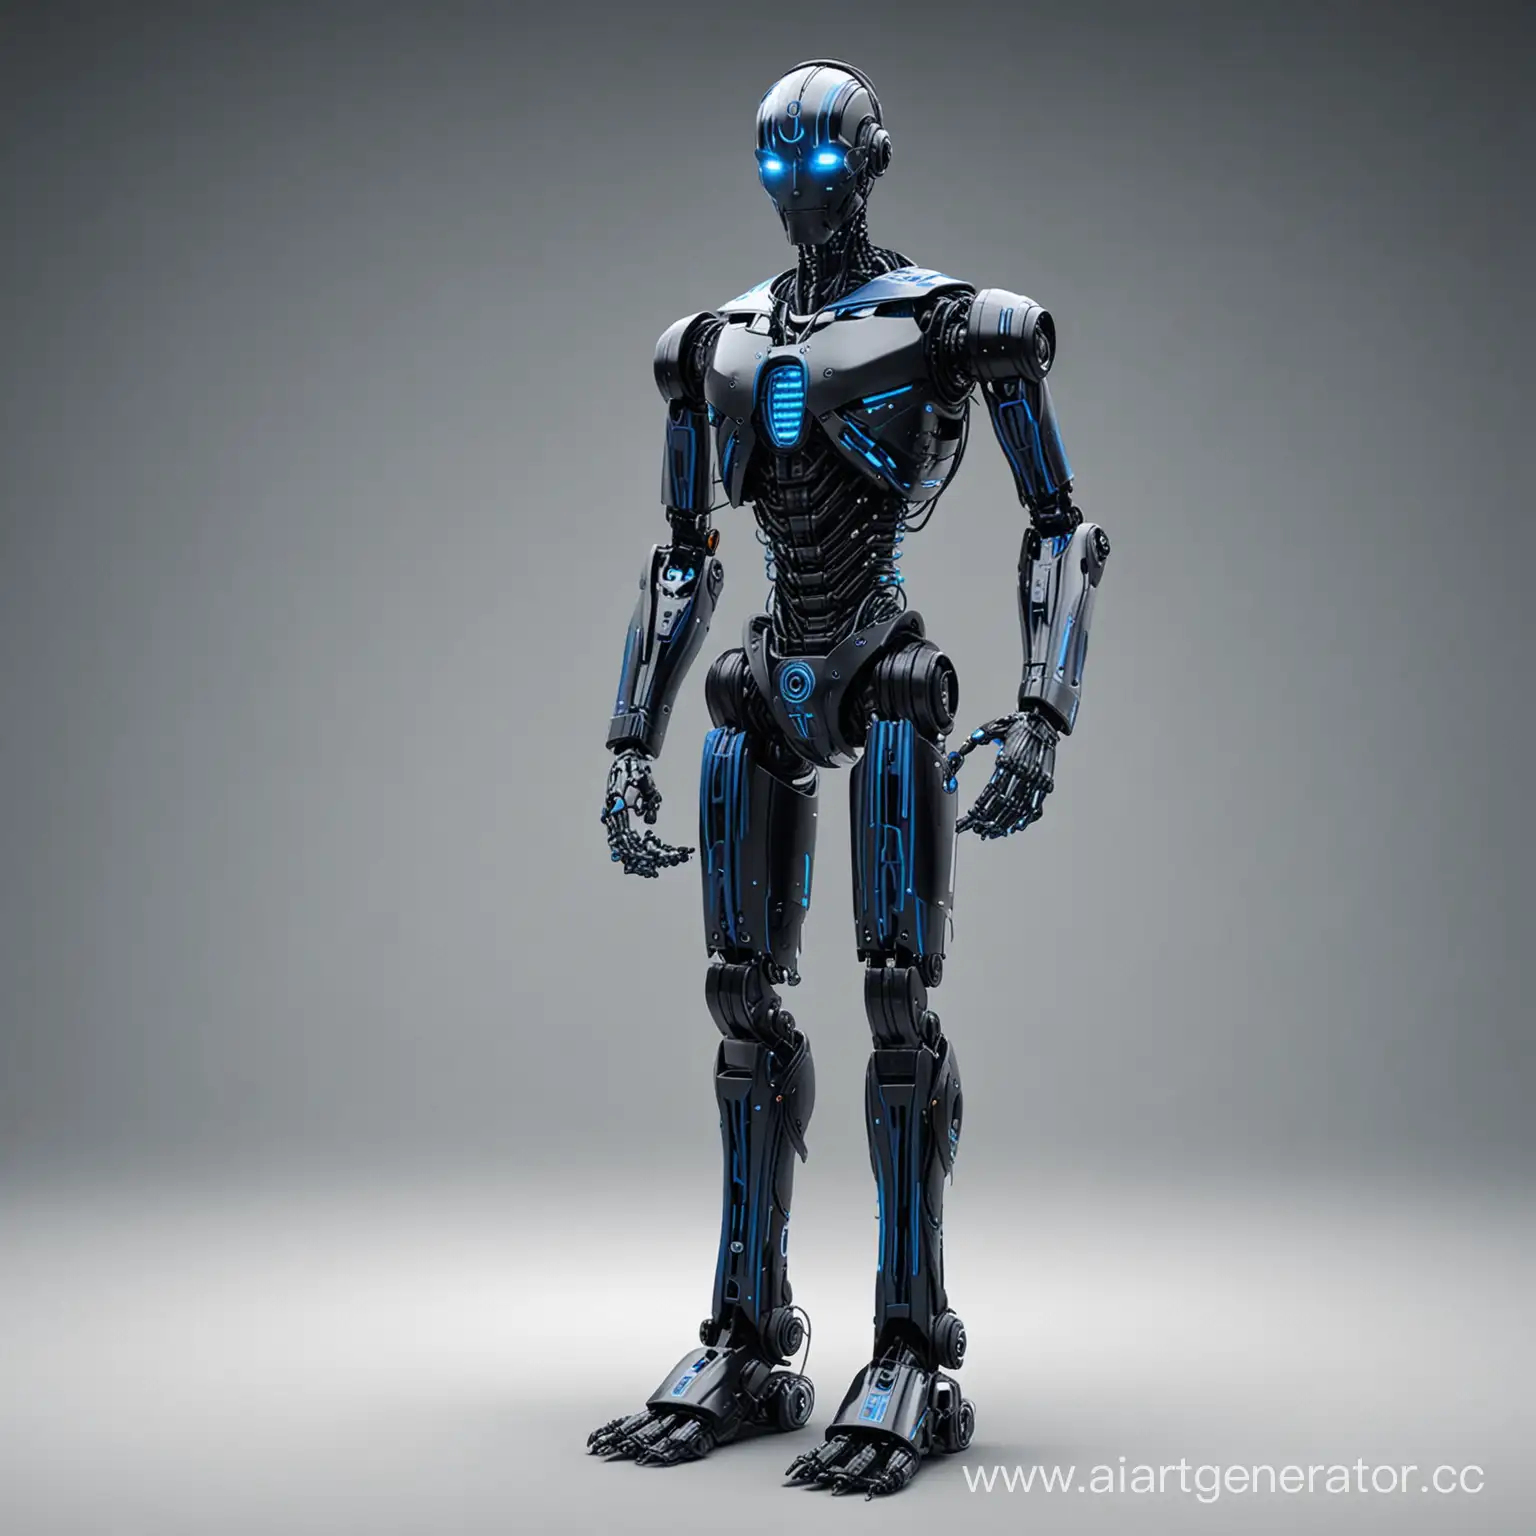 Futuristic-Giant-Black-Robot-with-Blue-Highlights-and-Smooth-Metal-Face